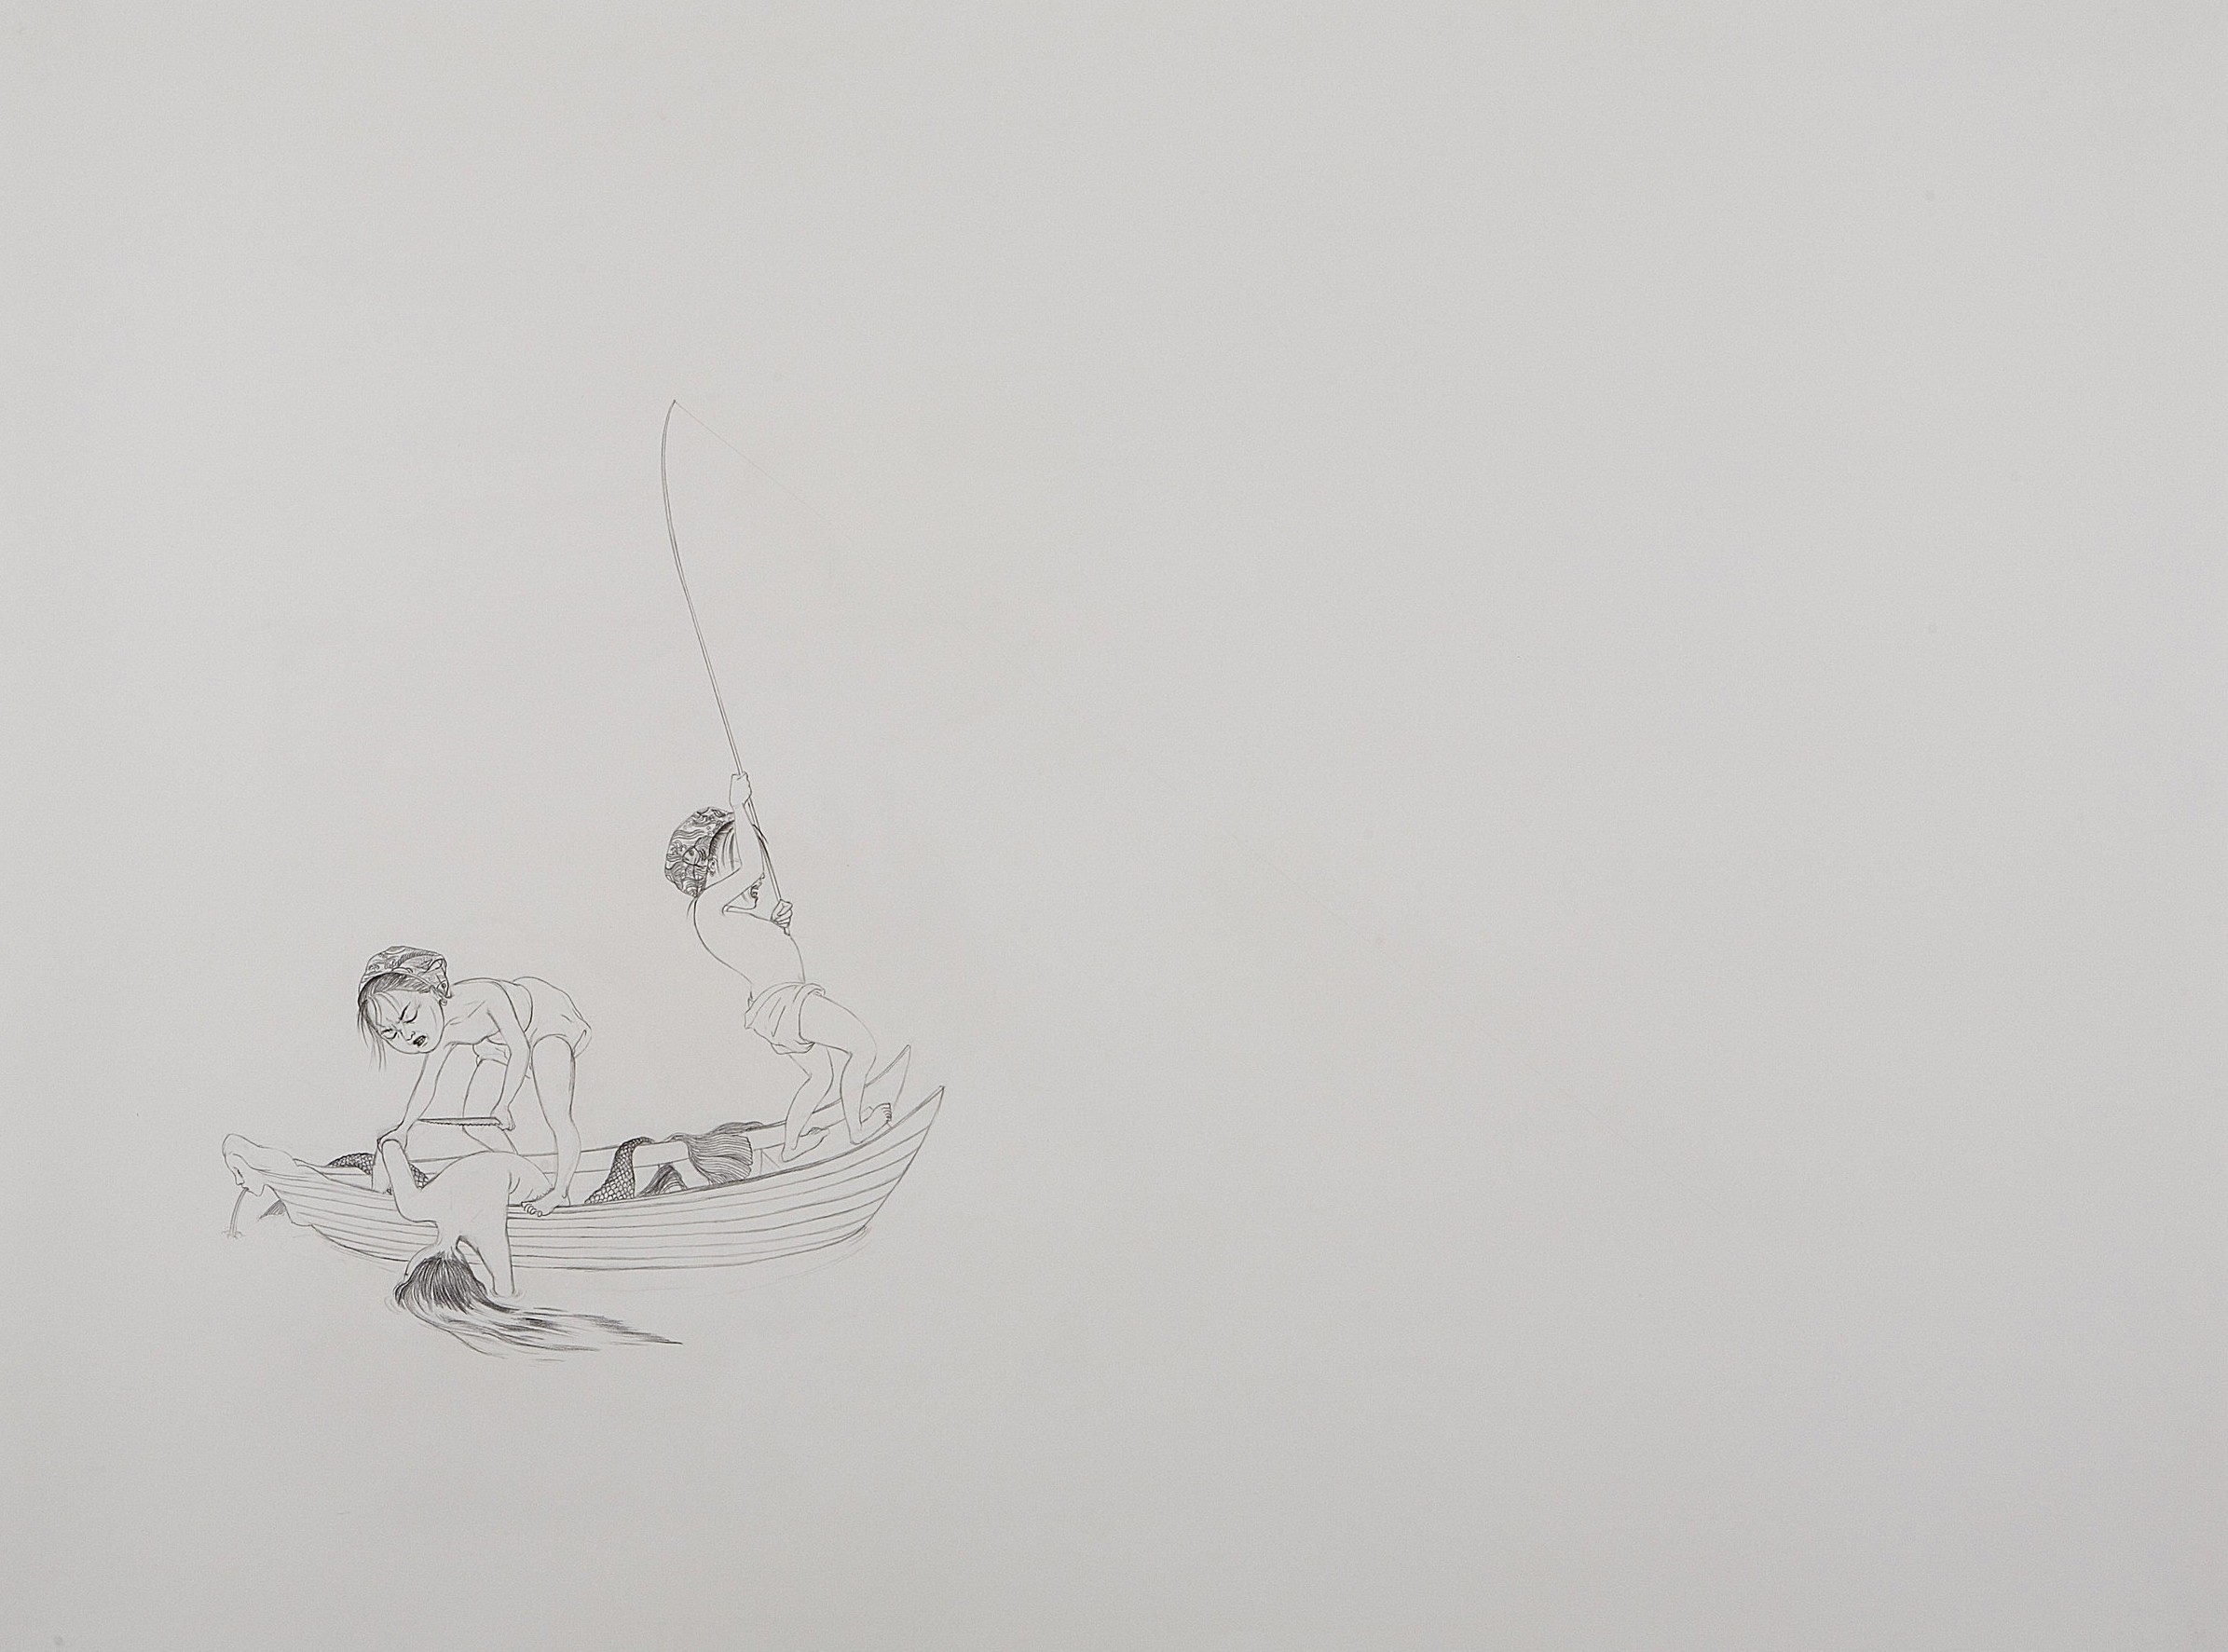   Surface Tension Series I: Big Catch , 2007 Graphite on paper 38 X 50 inches Private collection&nbsp; 